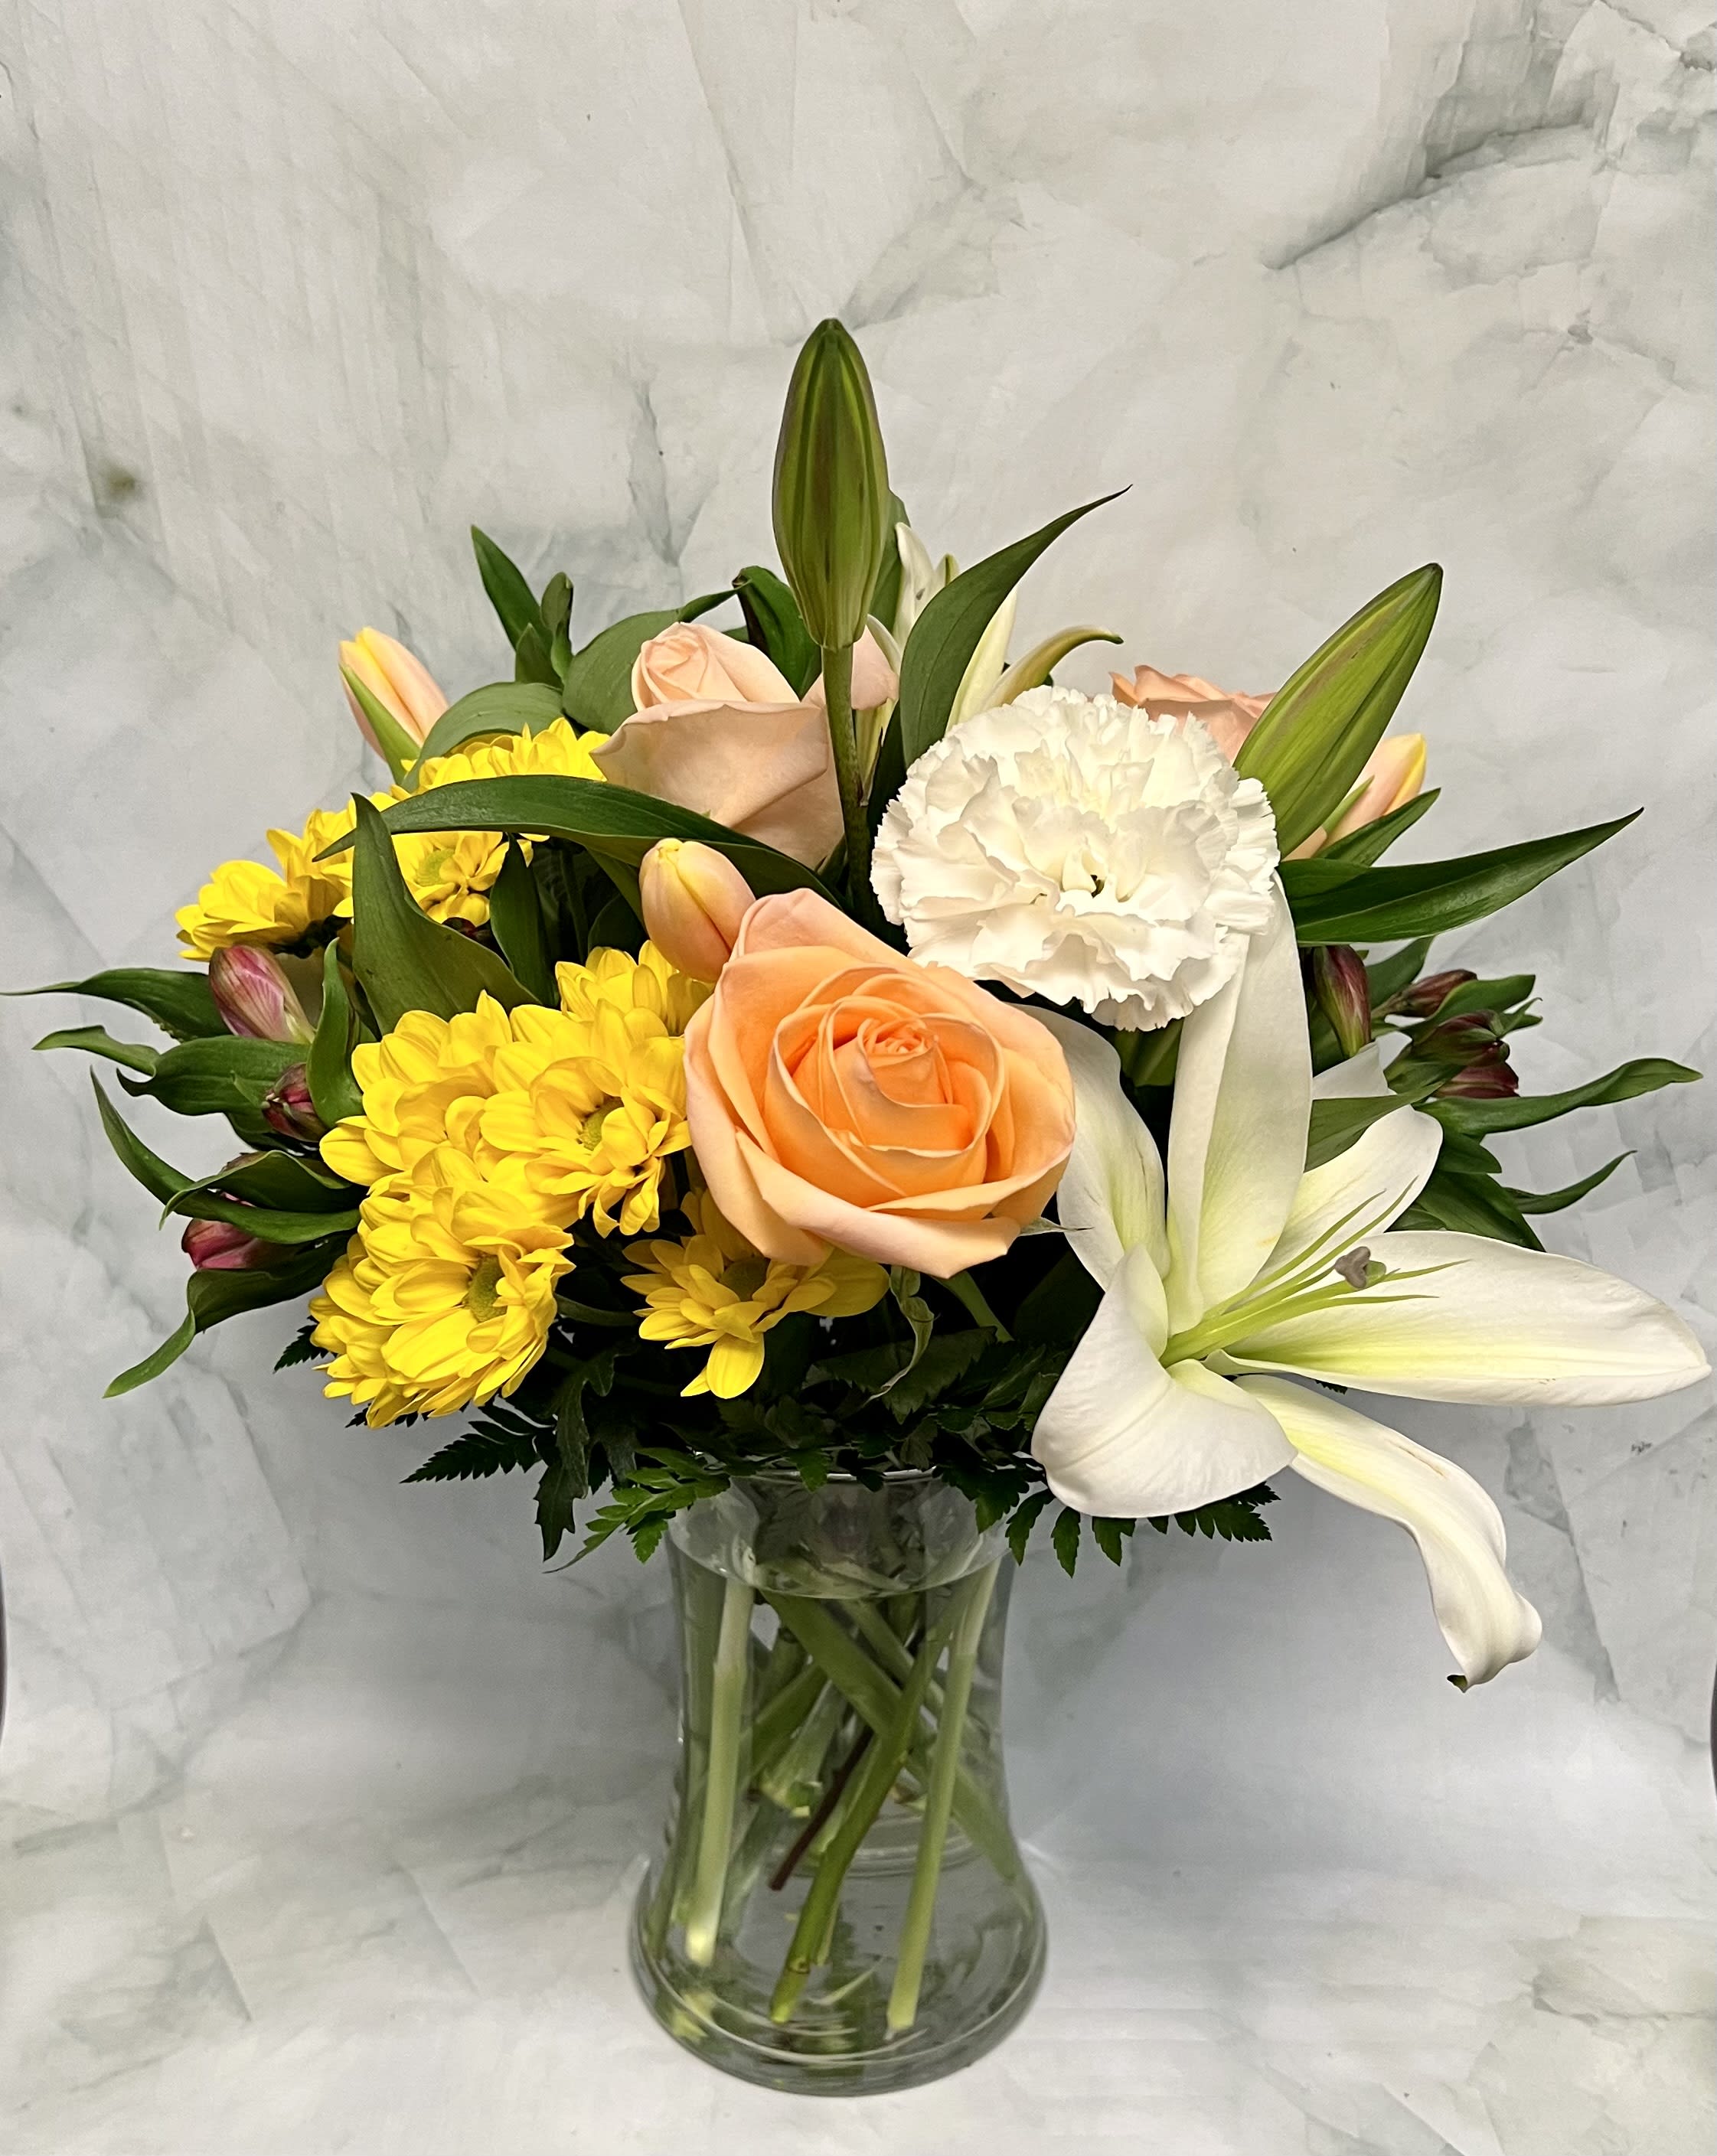 Princess Peach - This peach and white arrangement is perfect for the princess in your life. It is full of Lilies, Roses, Tulips, Carnations and Chrysanthemums. 